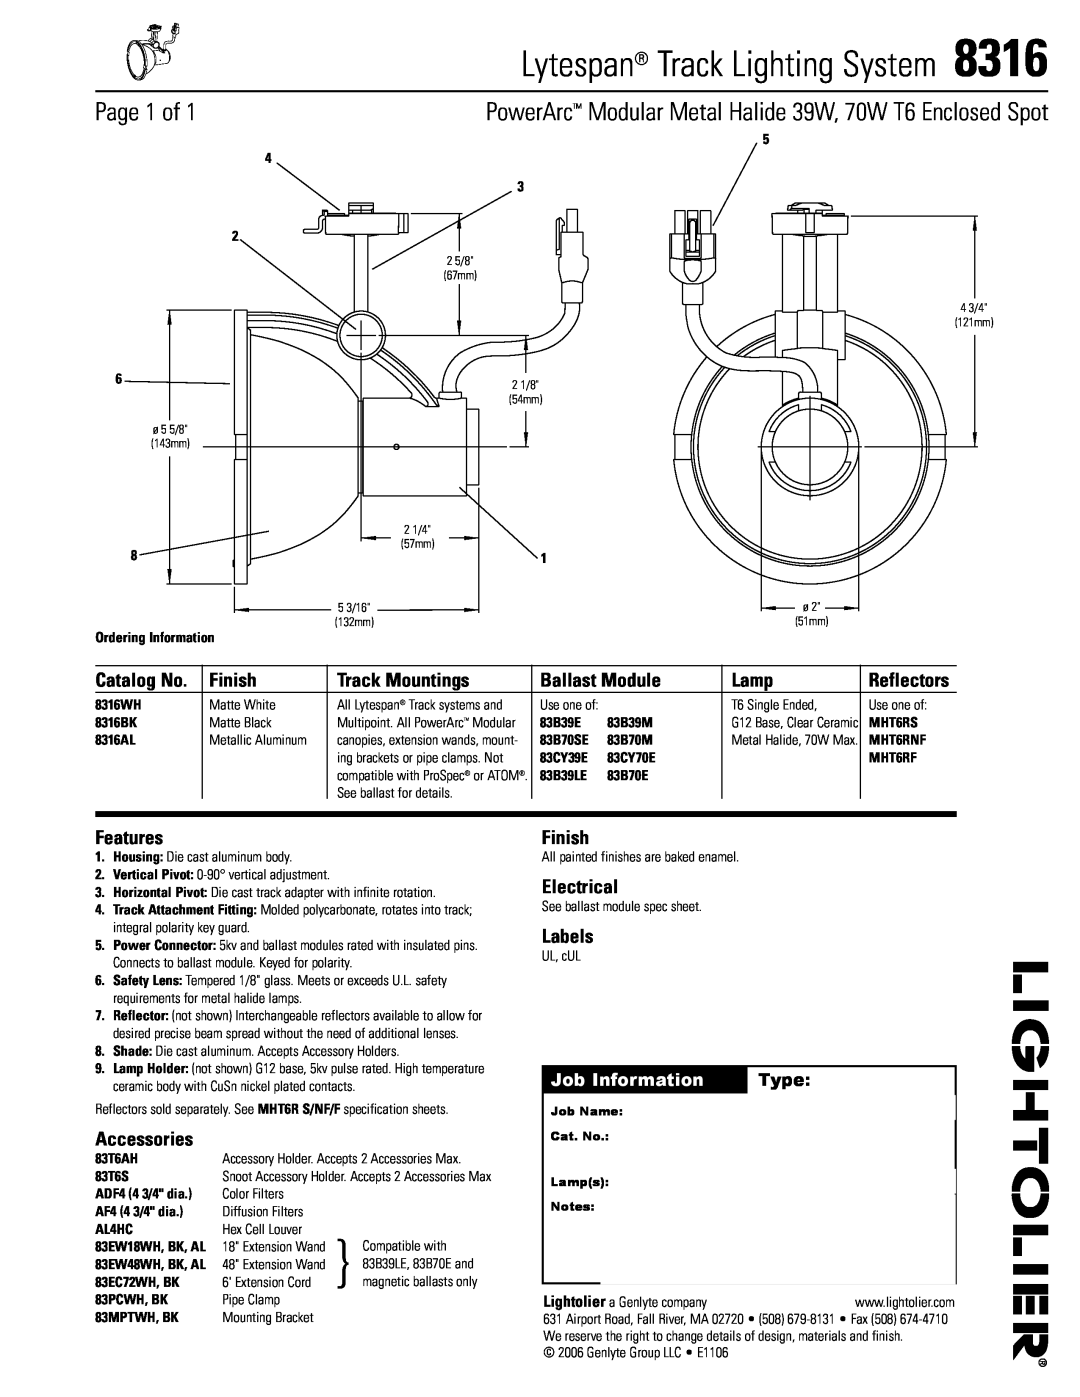 Lightolier 8316 specifications Lytespan Track Lighting System, Page 1 of, Finish, Track Mountings, Ballast Module, Lamp 